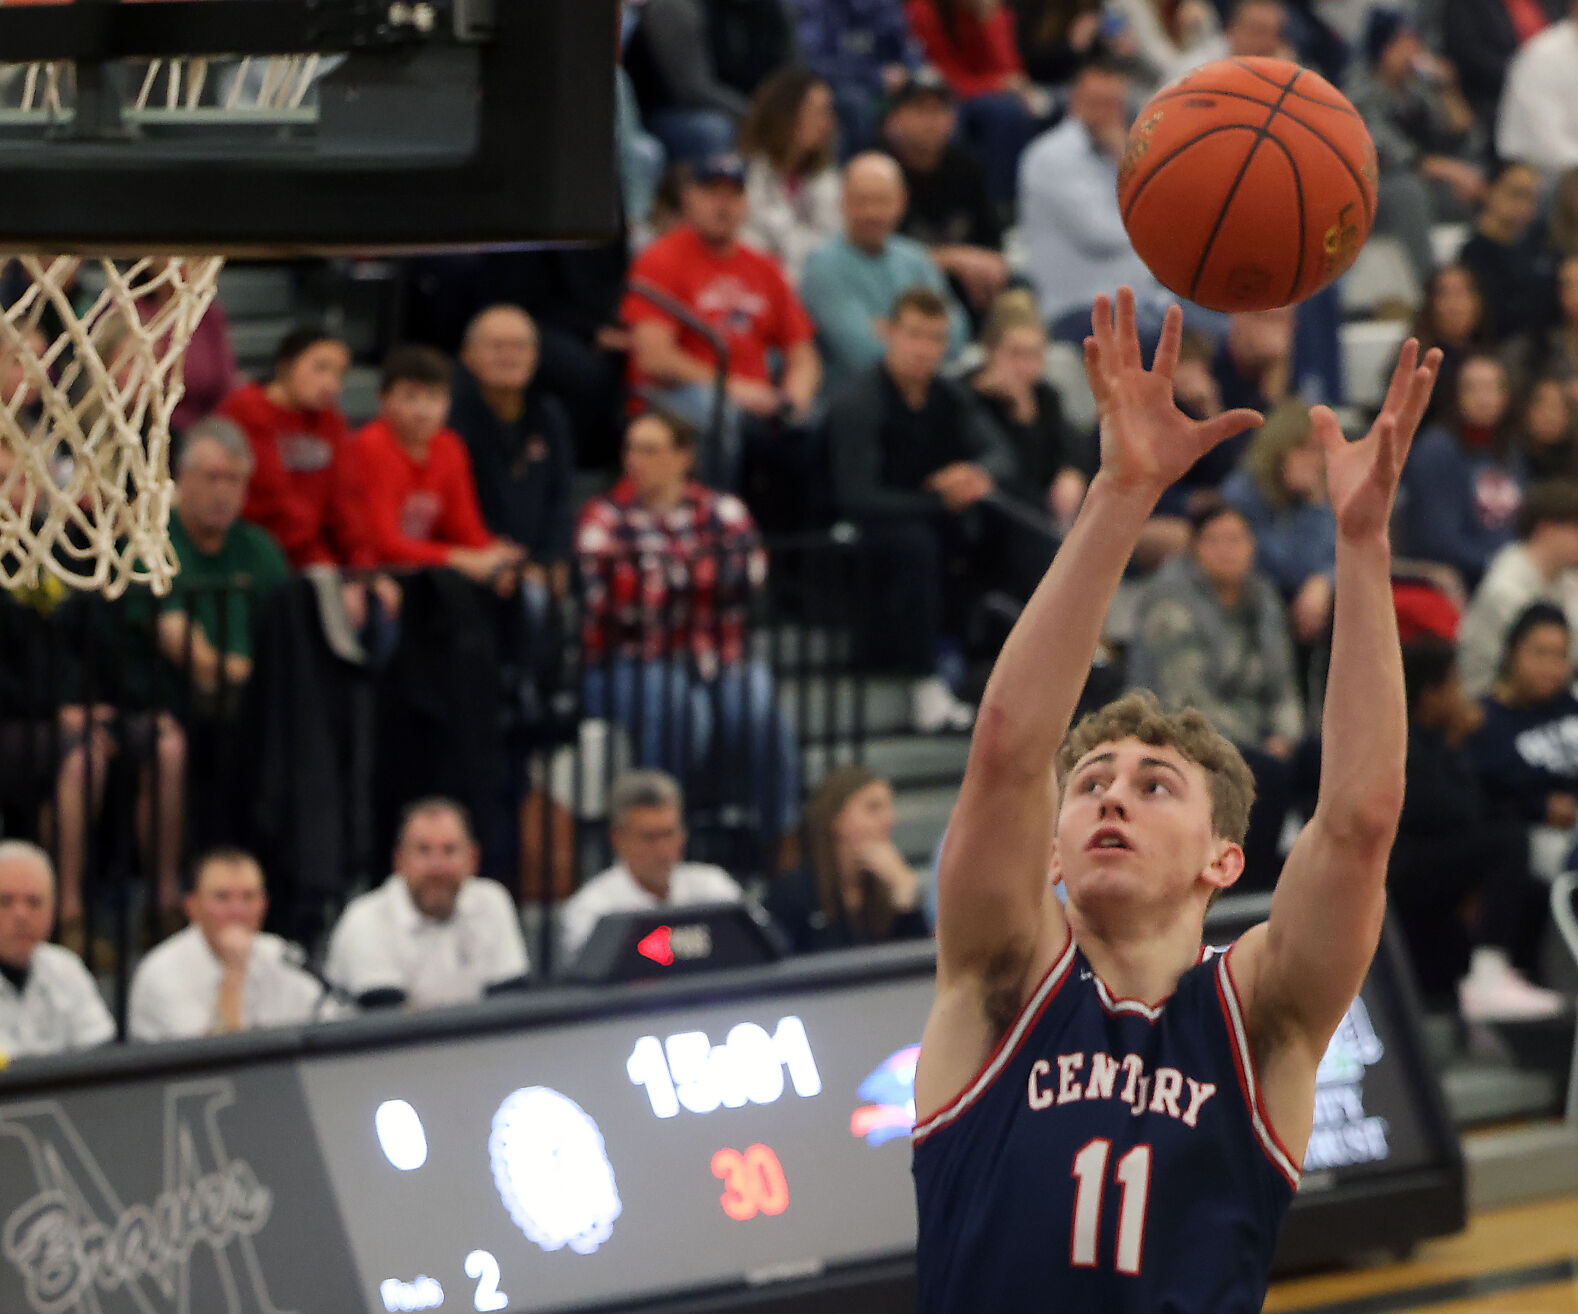 Isaiah Schafer Clinches Century’s Boys Basketball Team Career Scoring Record in Dominating Win